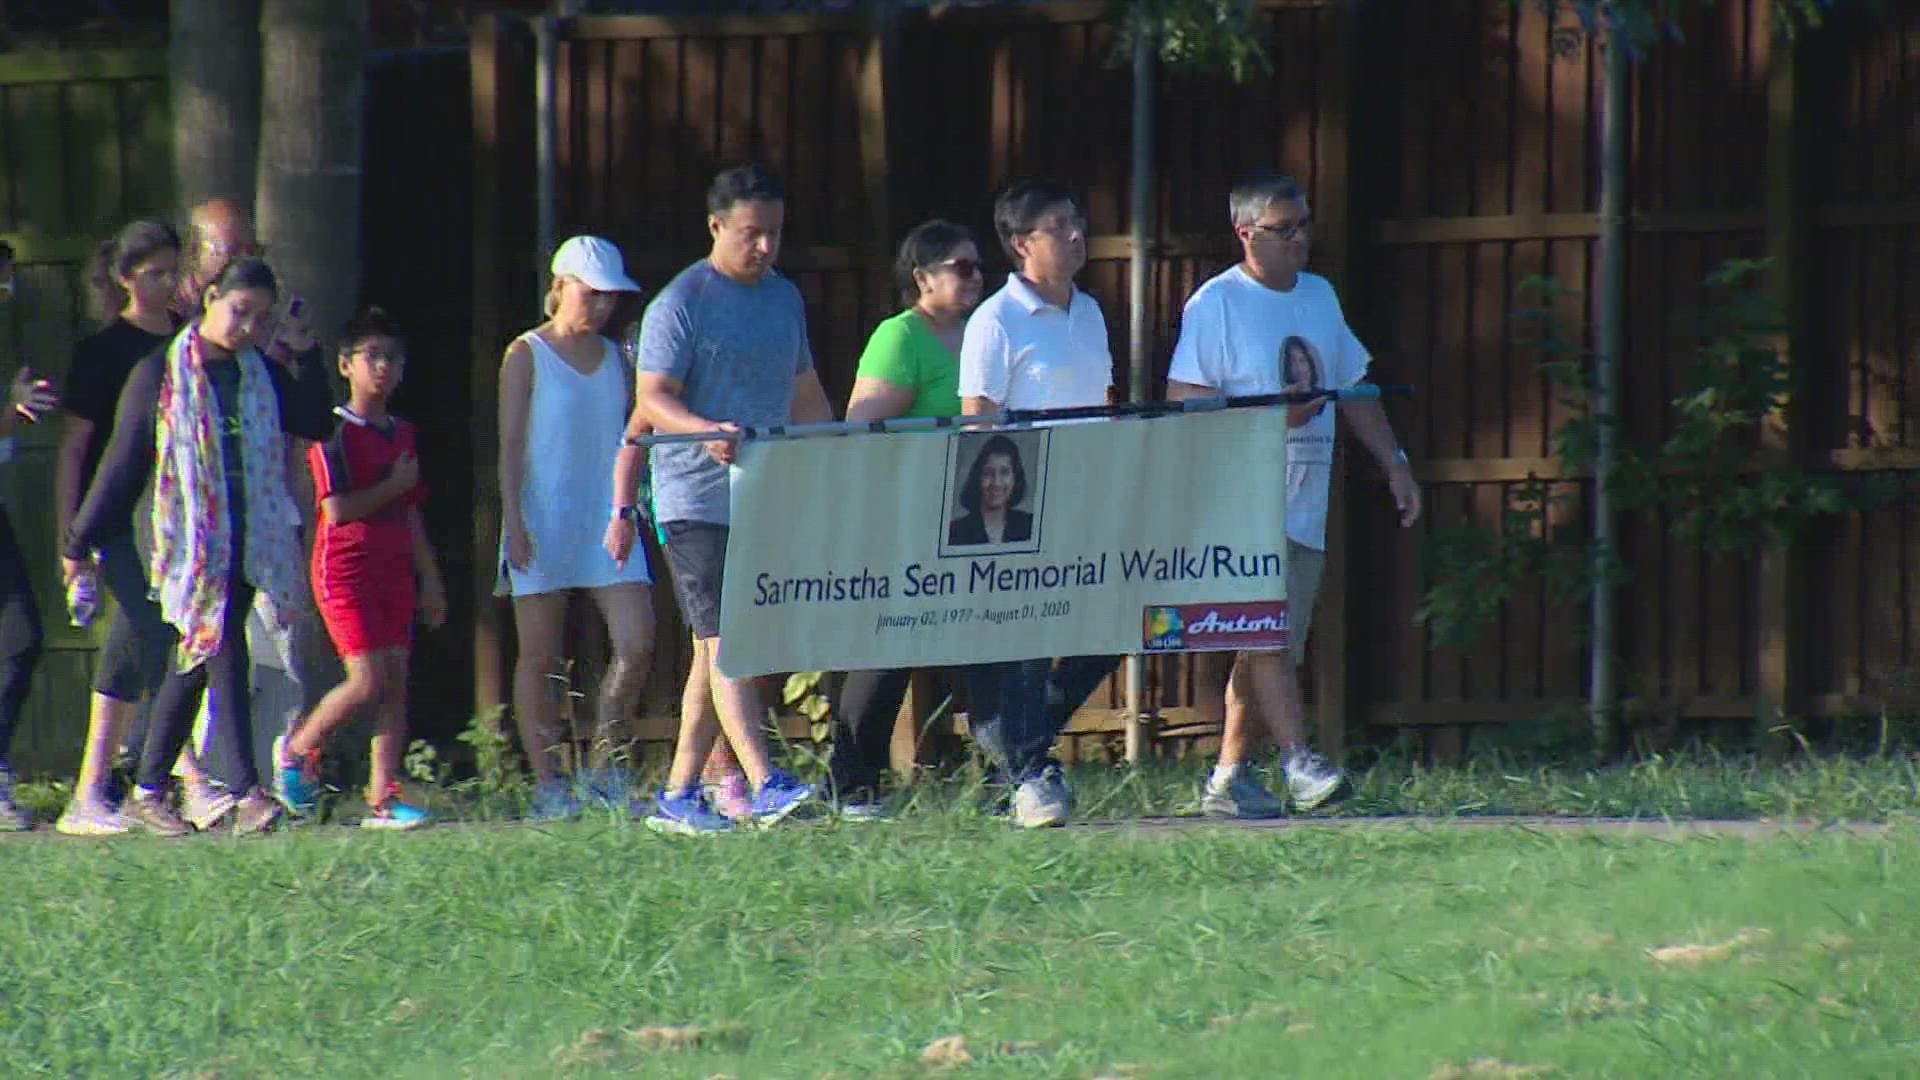 The memorial walk/run was held at Jack Carter Park to honor her life and stand for runner safety.